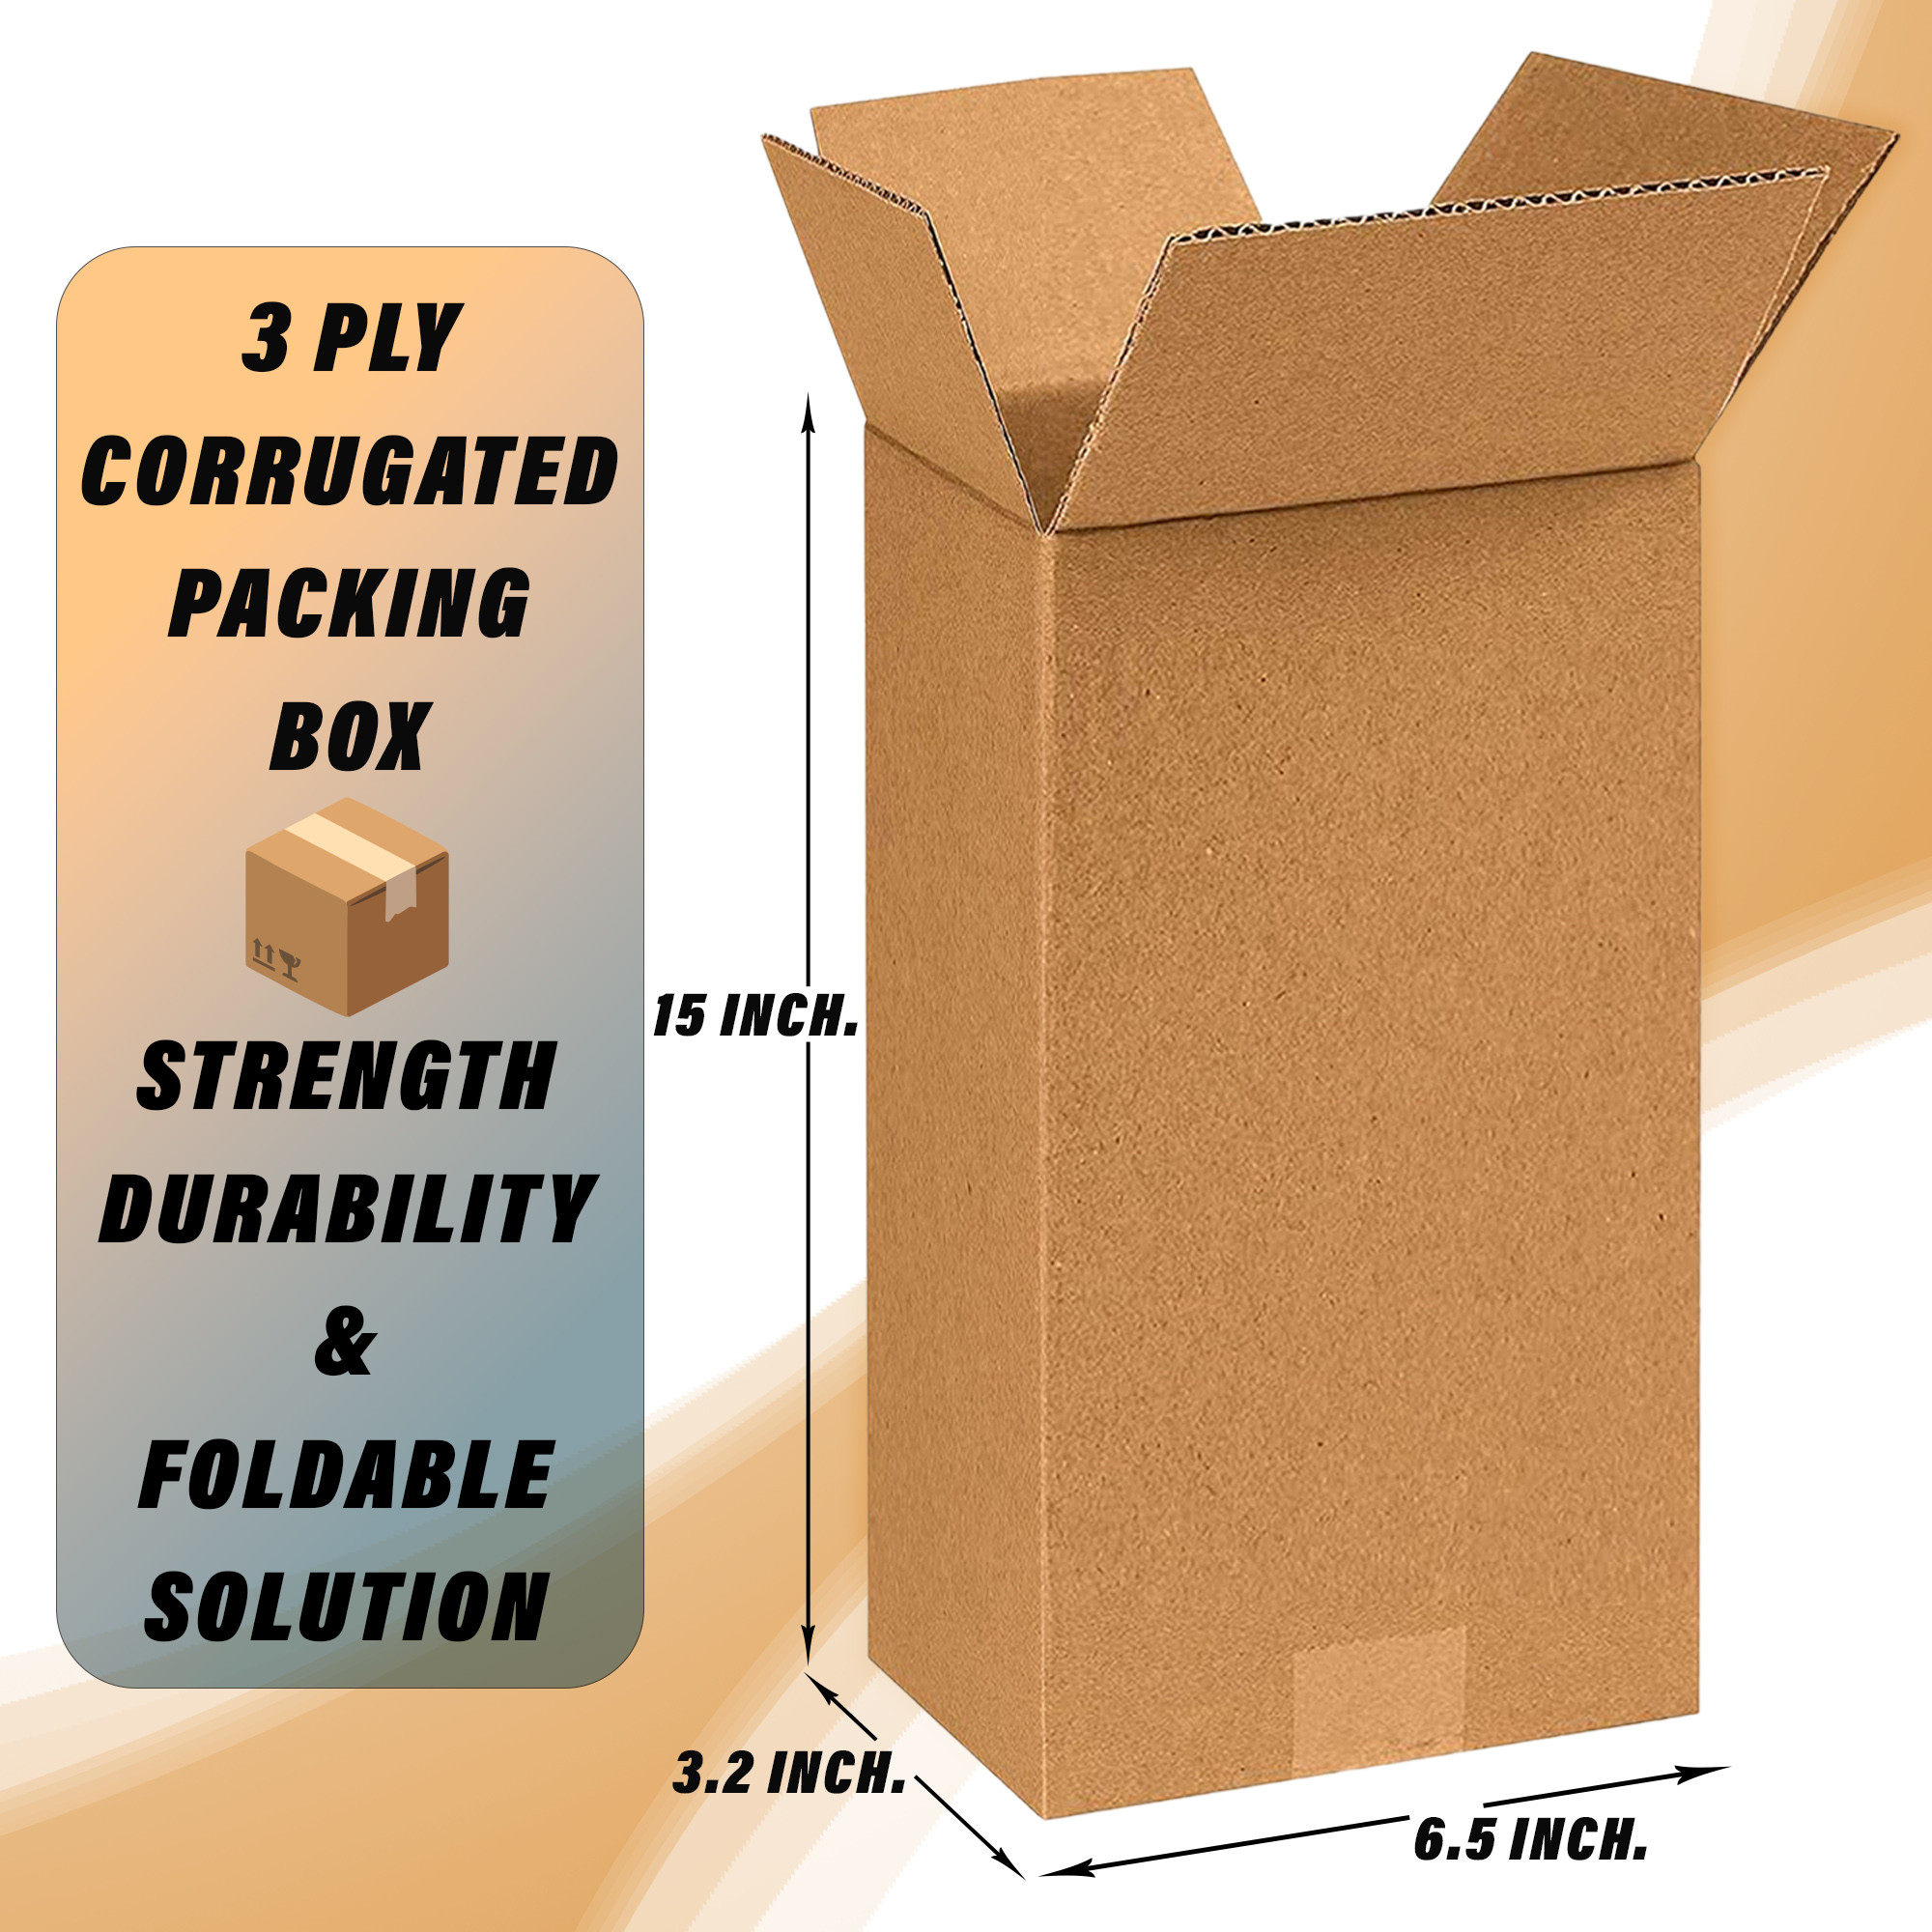 Kuber Industries Corrugated Box | 3 Ply Corrugated Packing Box | Corrugated for Shipping | Corrugated for Courier & Goods Transportation | L 6.5 x W 3.2 x H 15 Inch |Brown